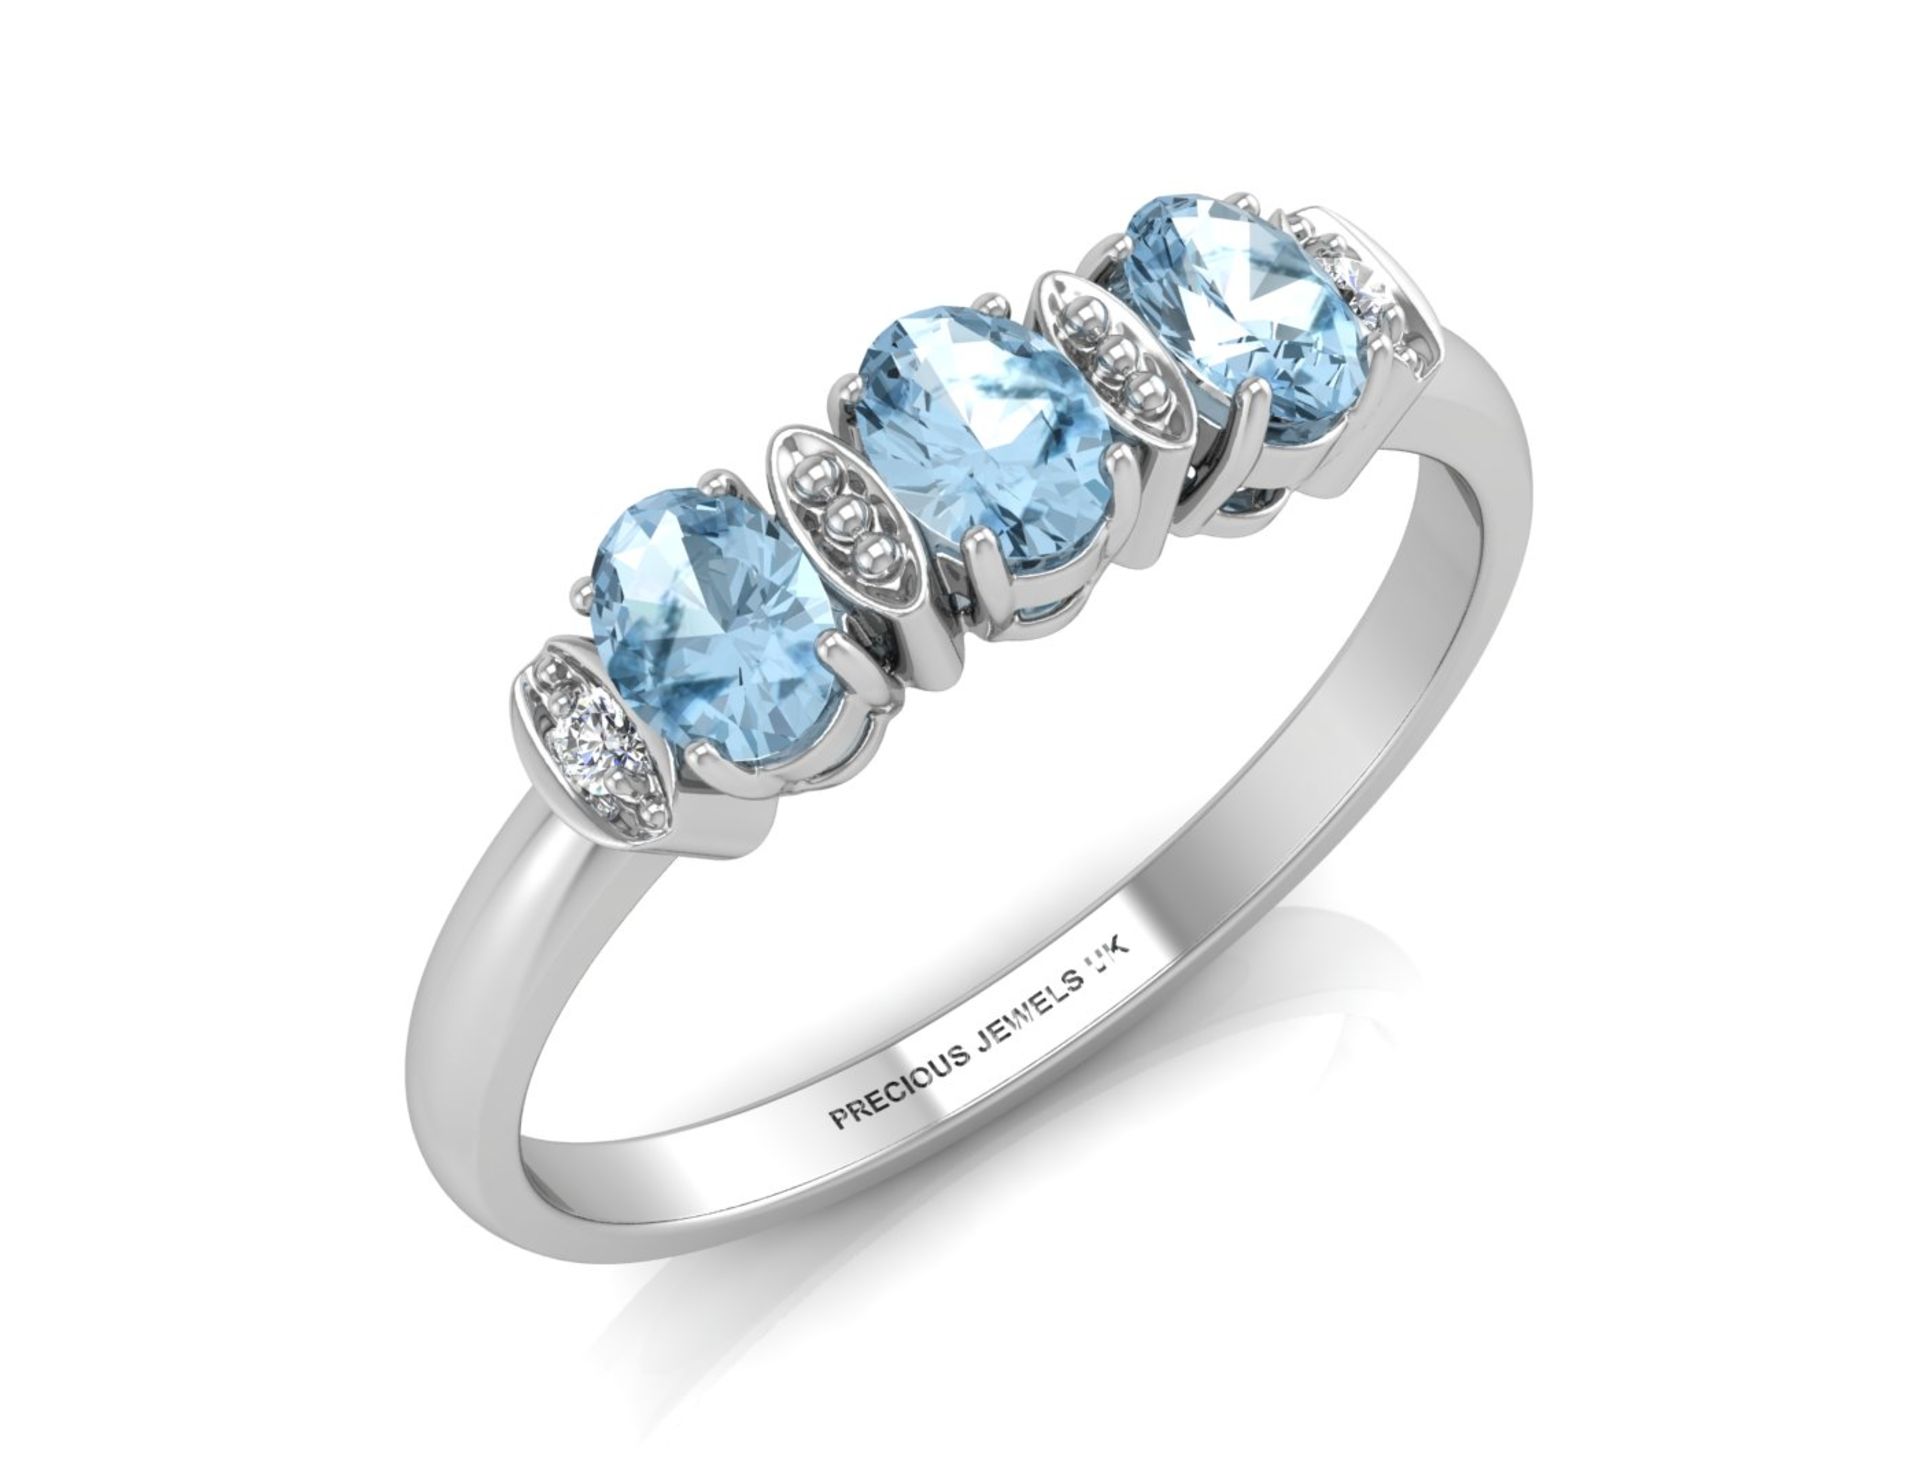 ***£959.00*** UNUSED - Certified by GIE 9ct White Gold Semi Eternity Diamond And Blue Topaz Ring 0. - Image 3 of 5